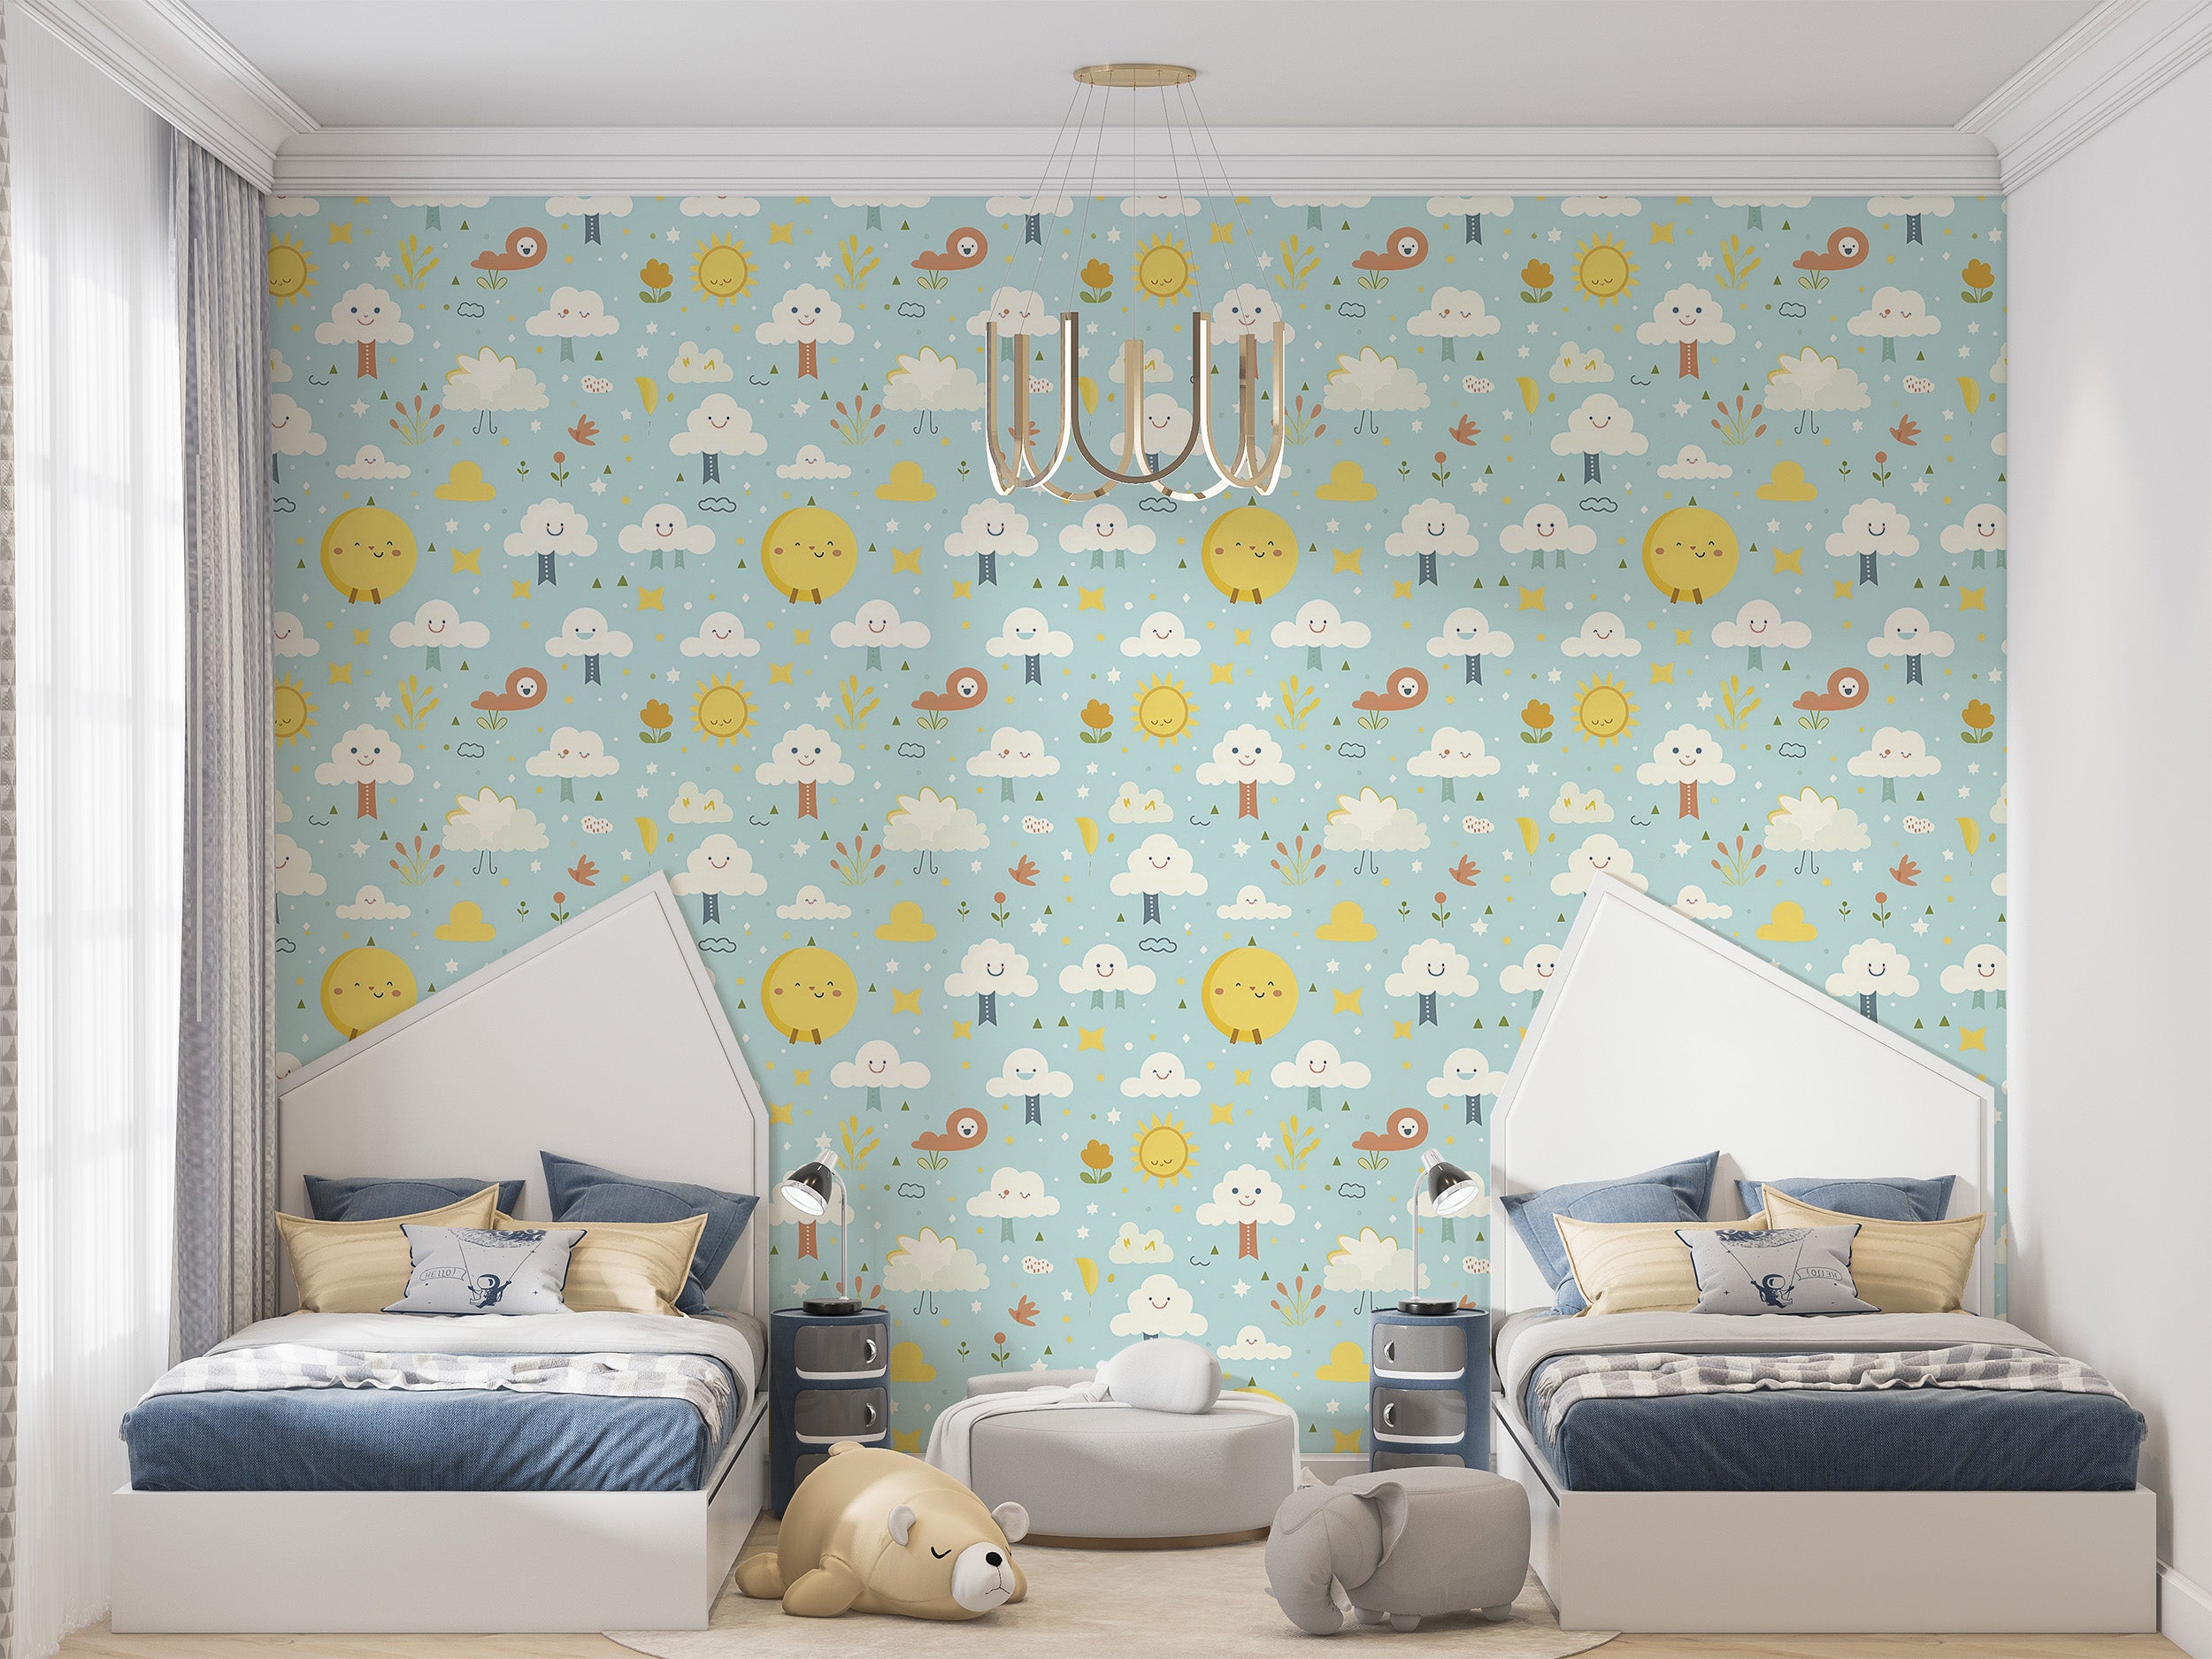 Enhance Kids Room with Colorful Peel and Stick Wallpaper